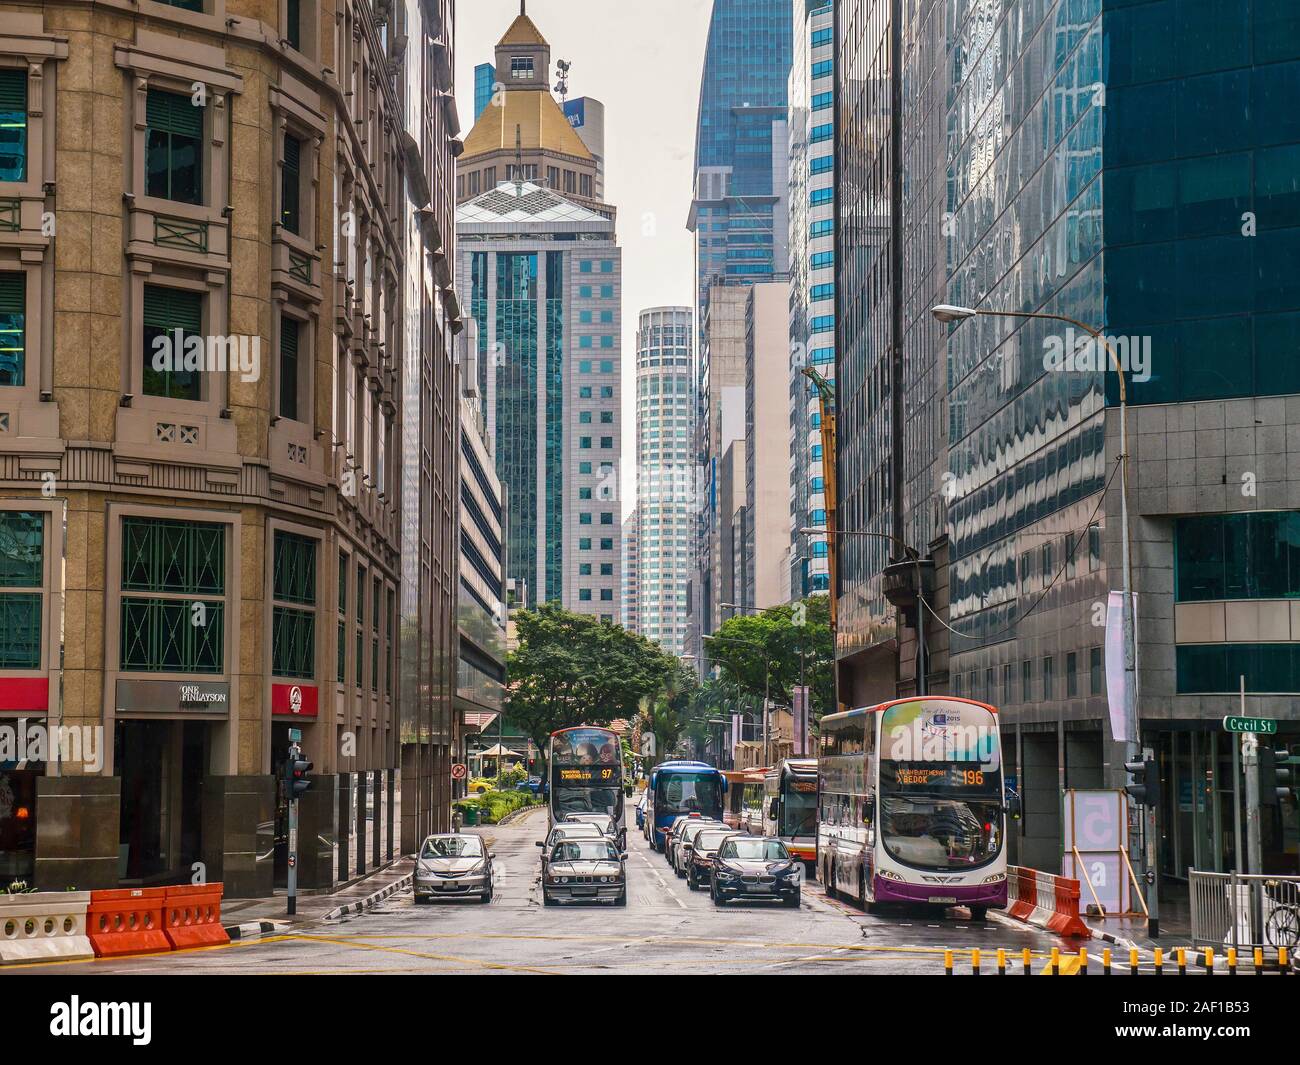 Traffic stopped at a red light on Robinson Road in Singapore's downtown business core, surrounded by skyscrapers on both sides. Stock Photo